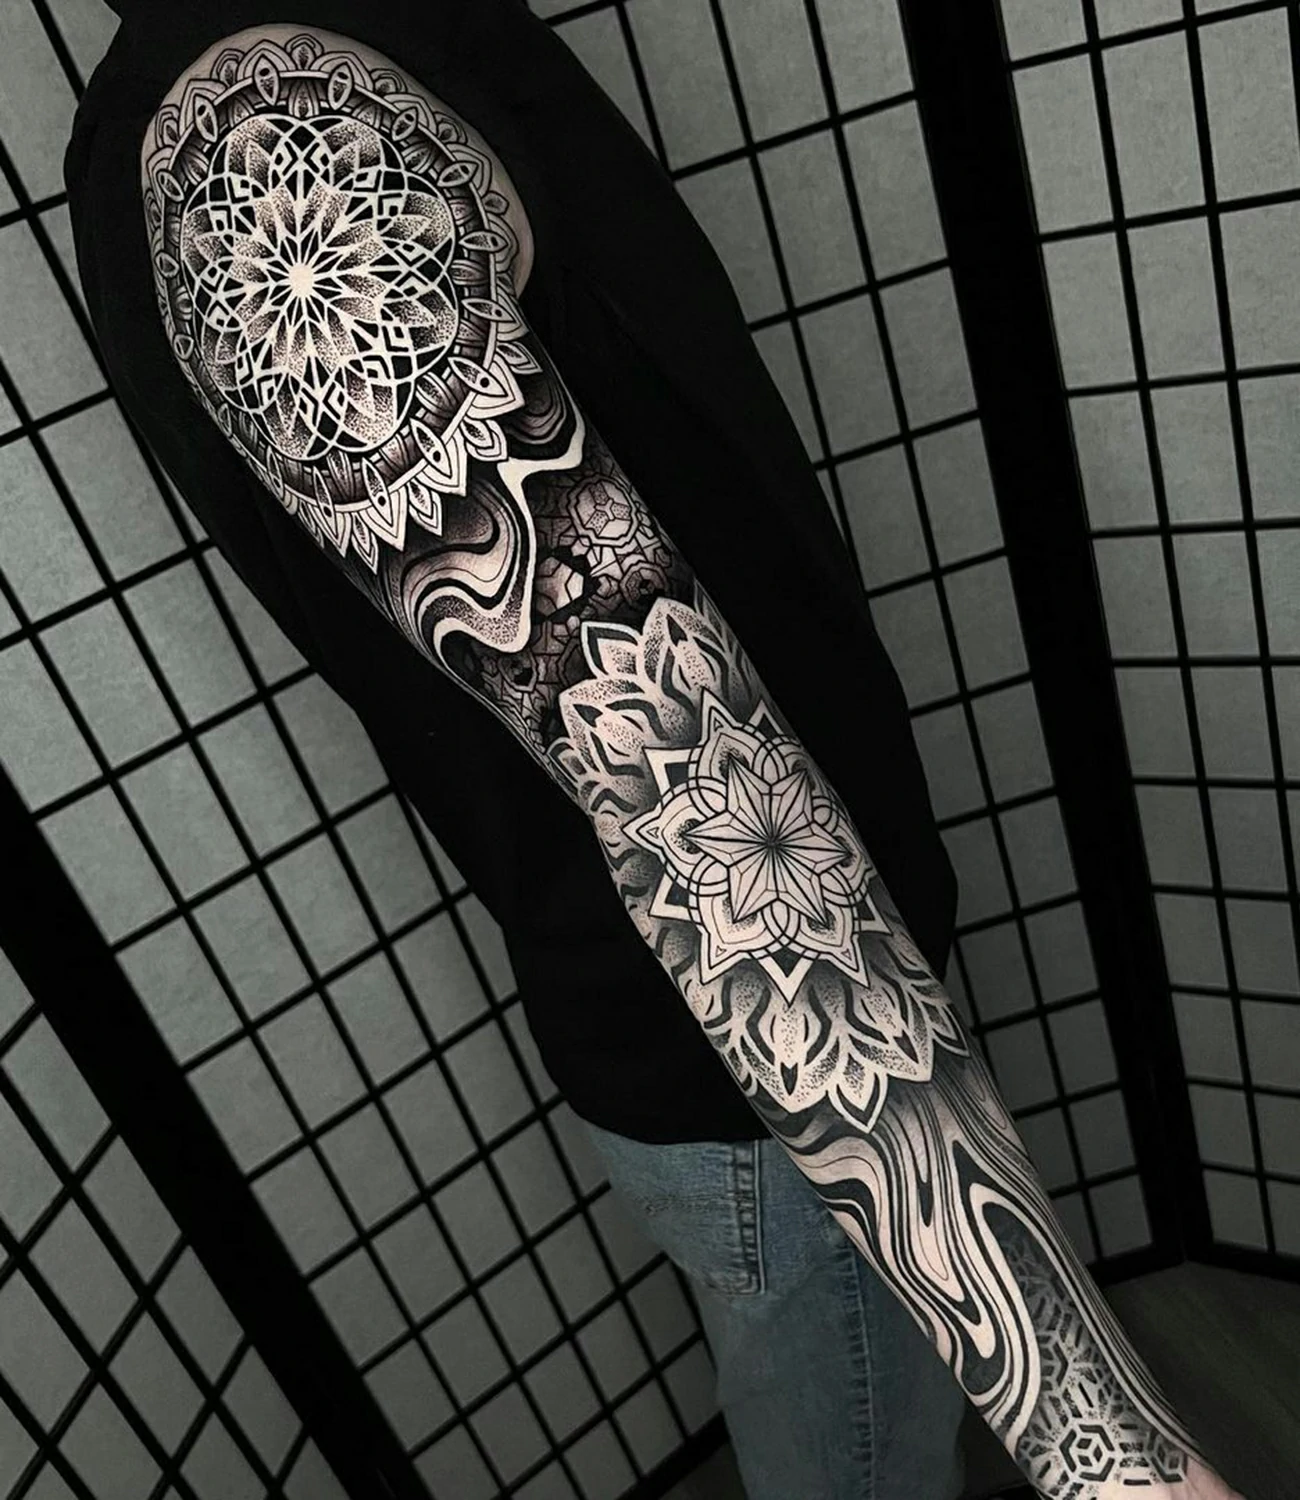 Geometric Tattoo Sleeve: A geometric tattoo sleeve covers the arm with interconnected shapes and patterns, offering a cohesive and visually stunning artwork.